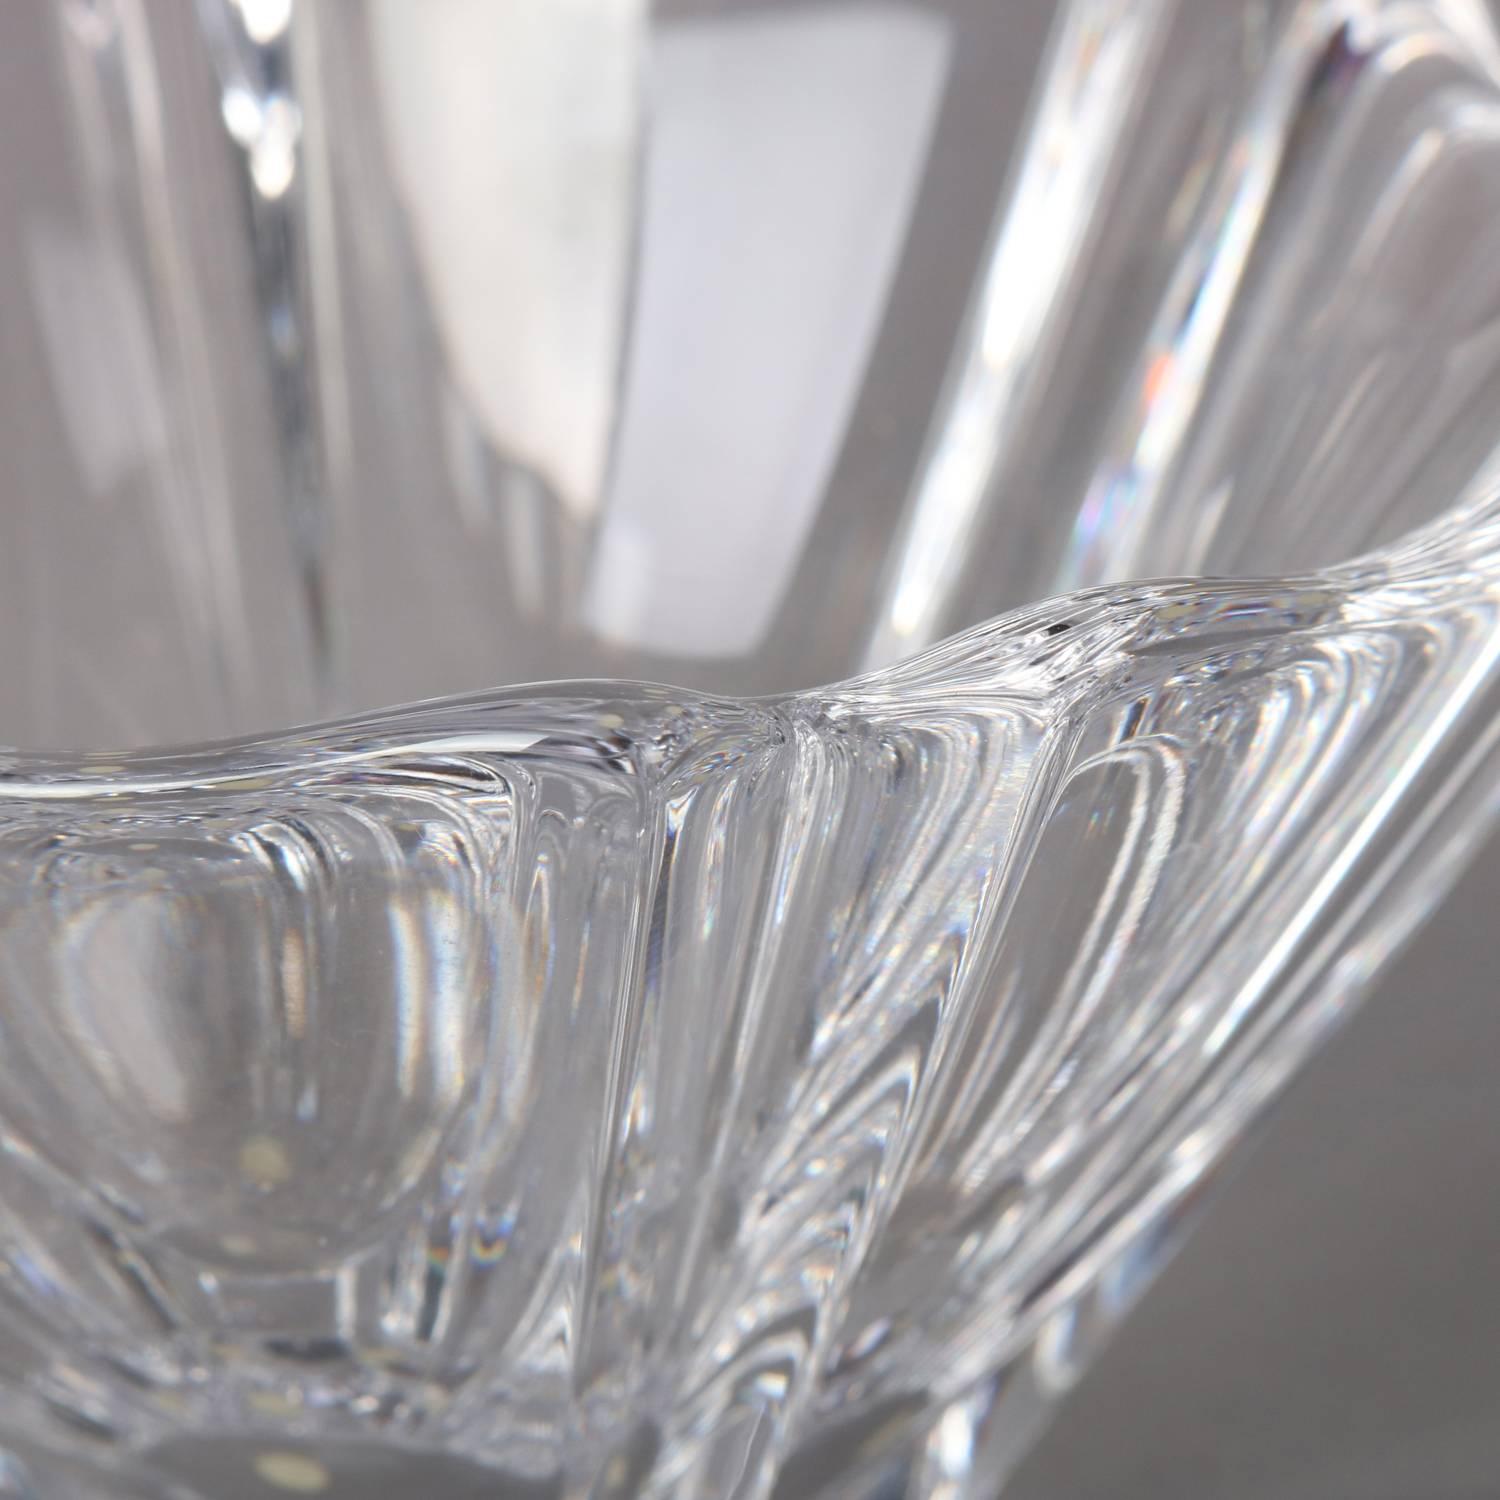 Swedish crystal Orion bowl designed for Orrefors by sculptor Lars Hellsten features flared form with scalloped edge, signed at base, 20th century

Measures: 3.5